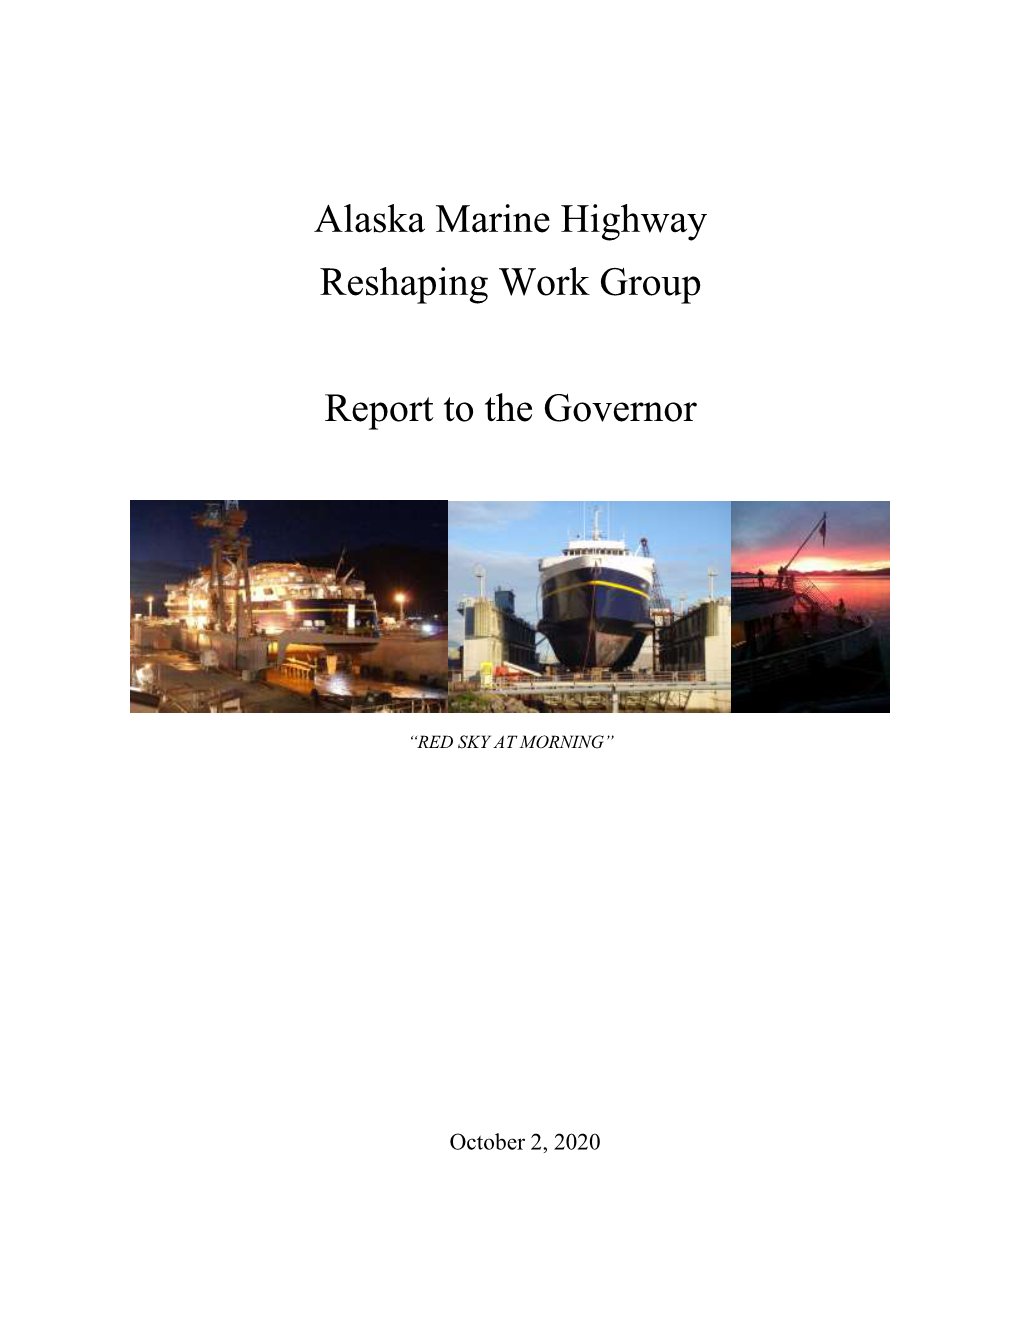 Alaska Marine Highway Reshaping Work Group Report to the Governor